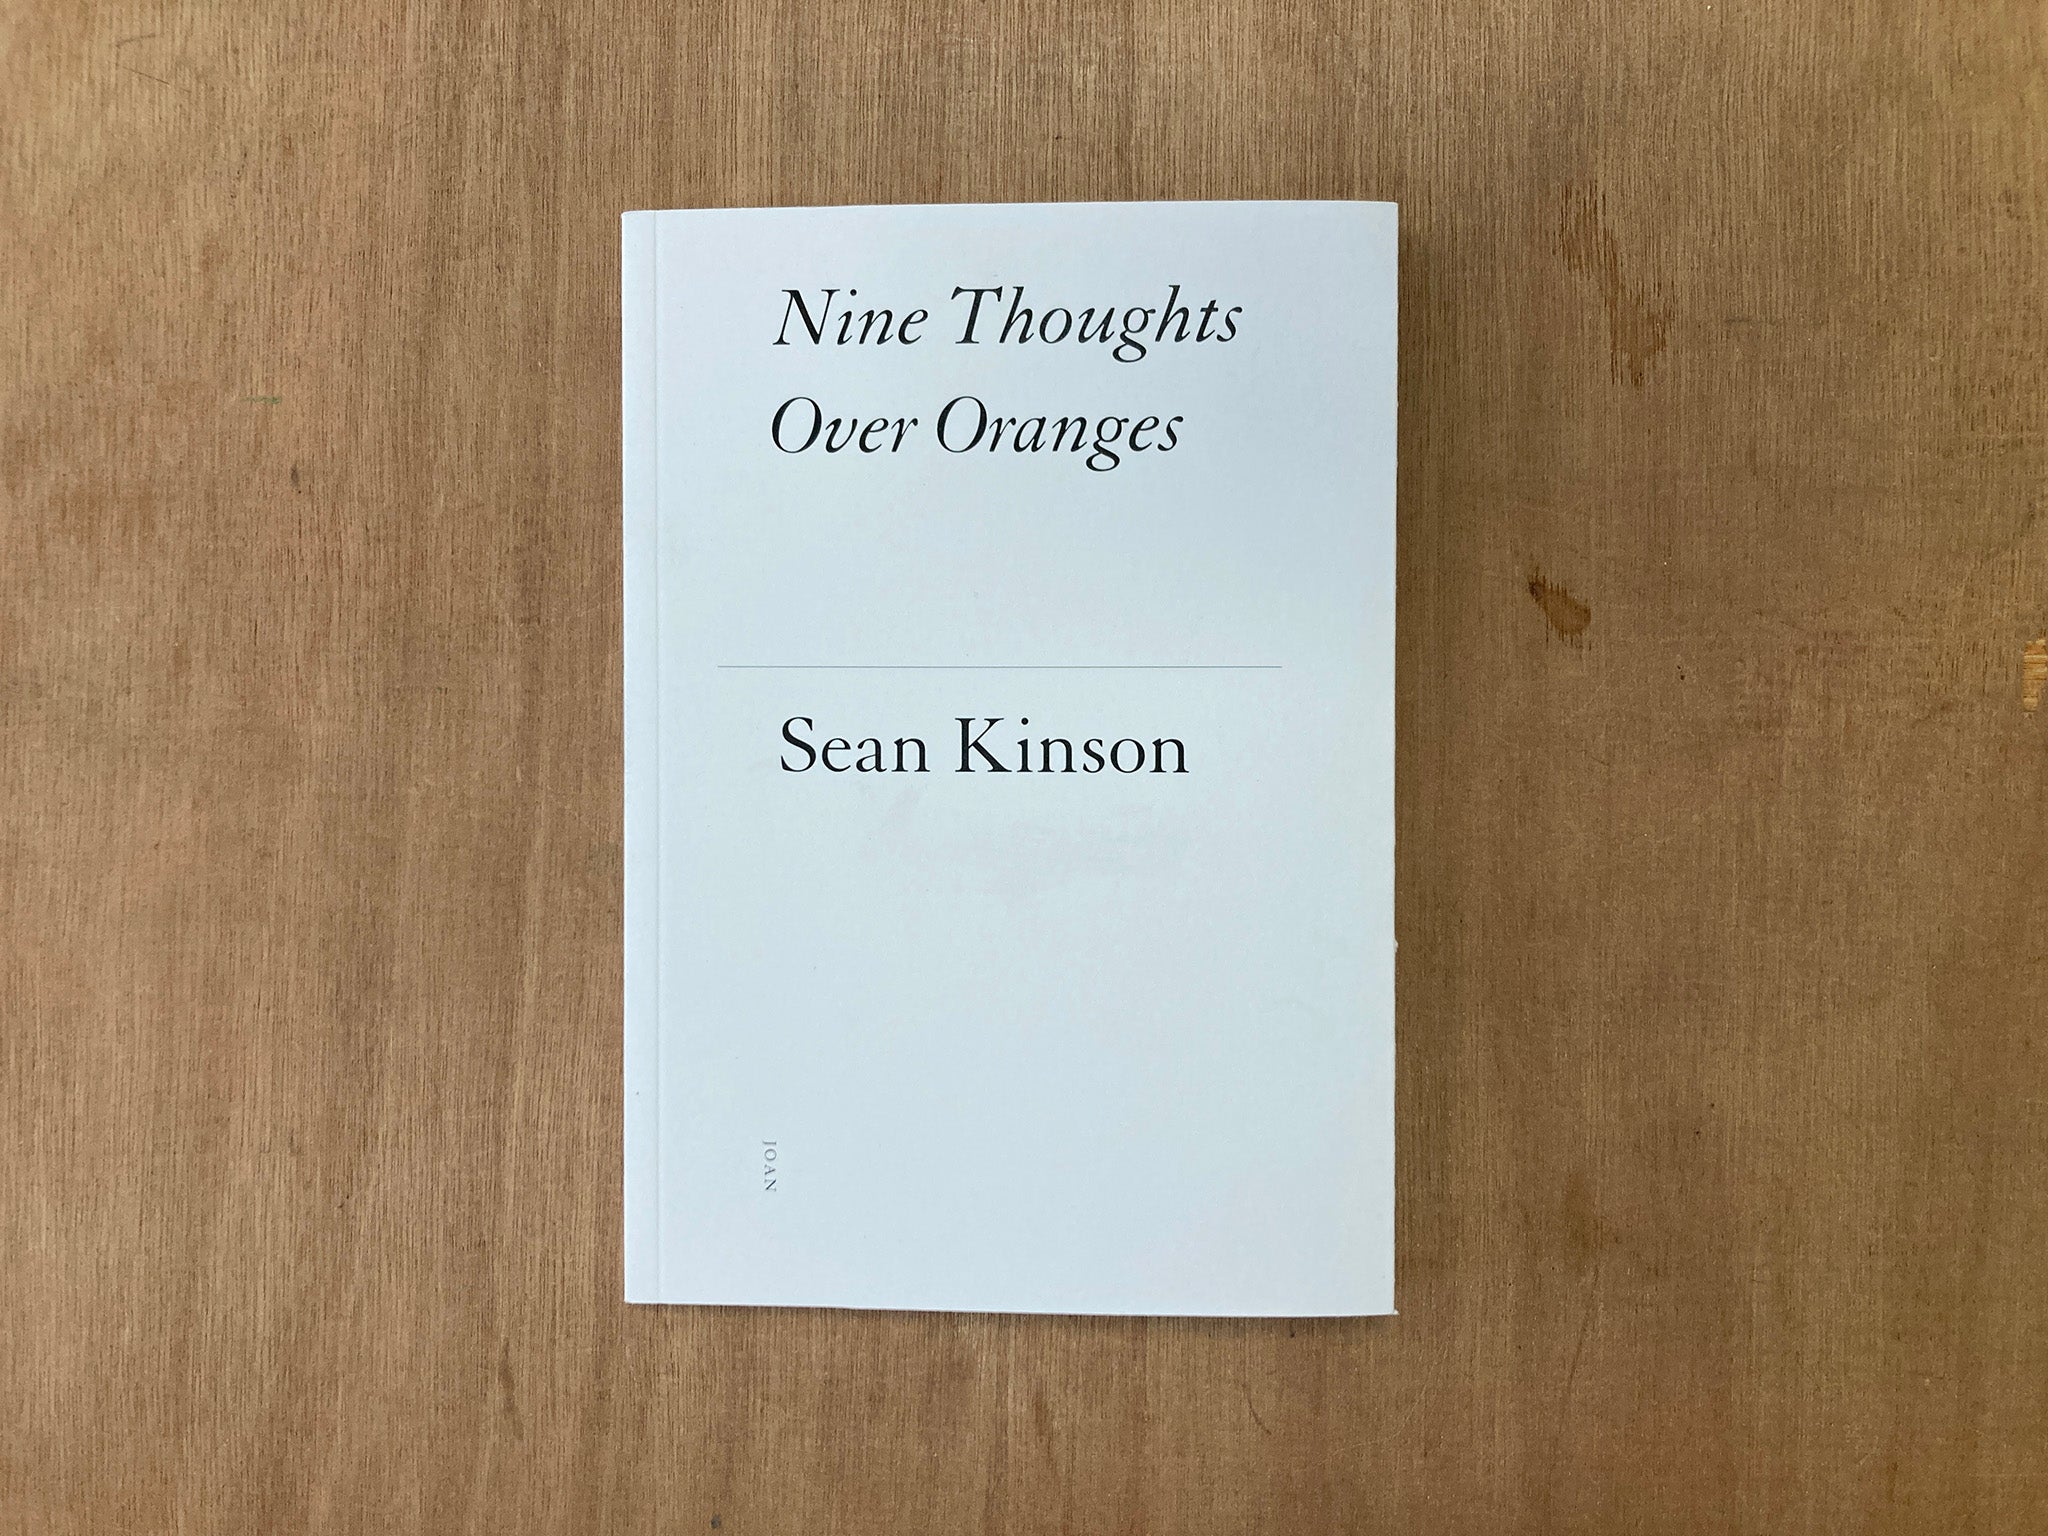 NINE THOUGHTS OVER ORANGES by Sean Kinson